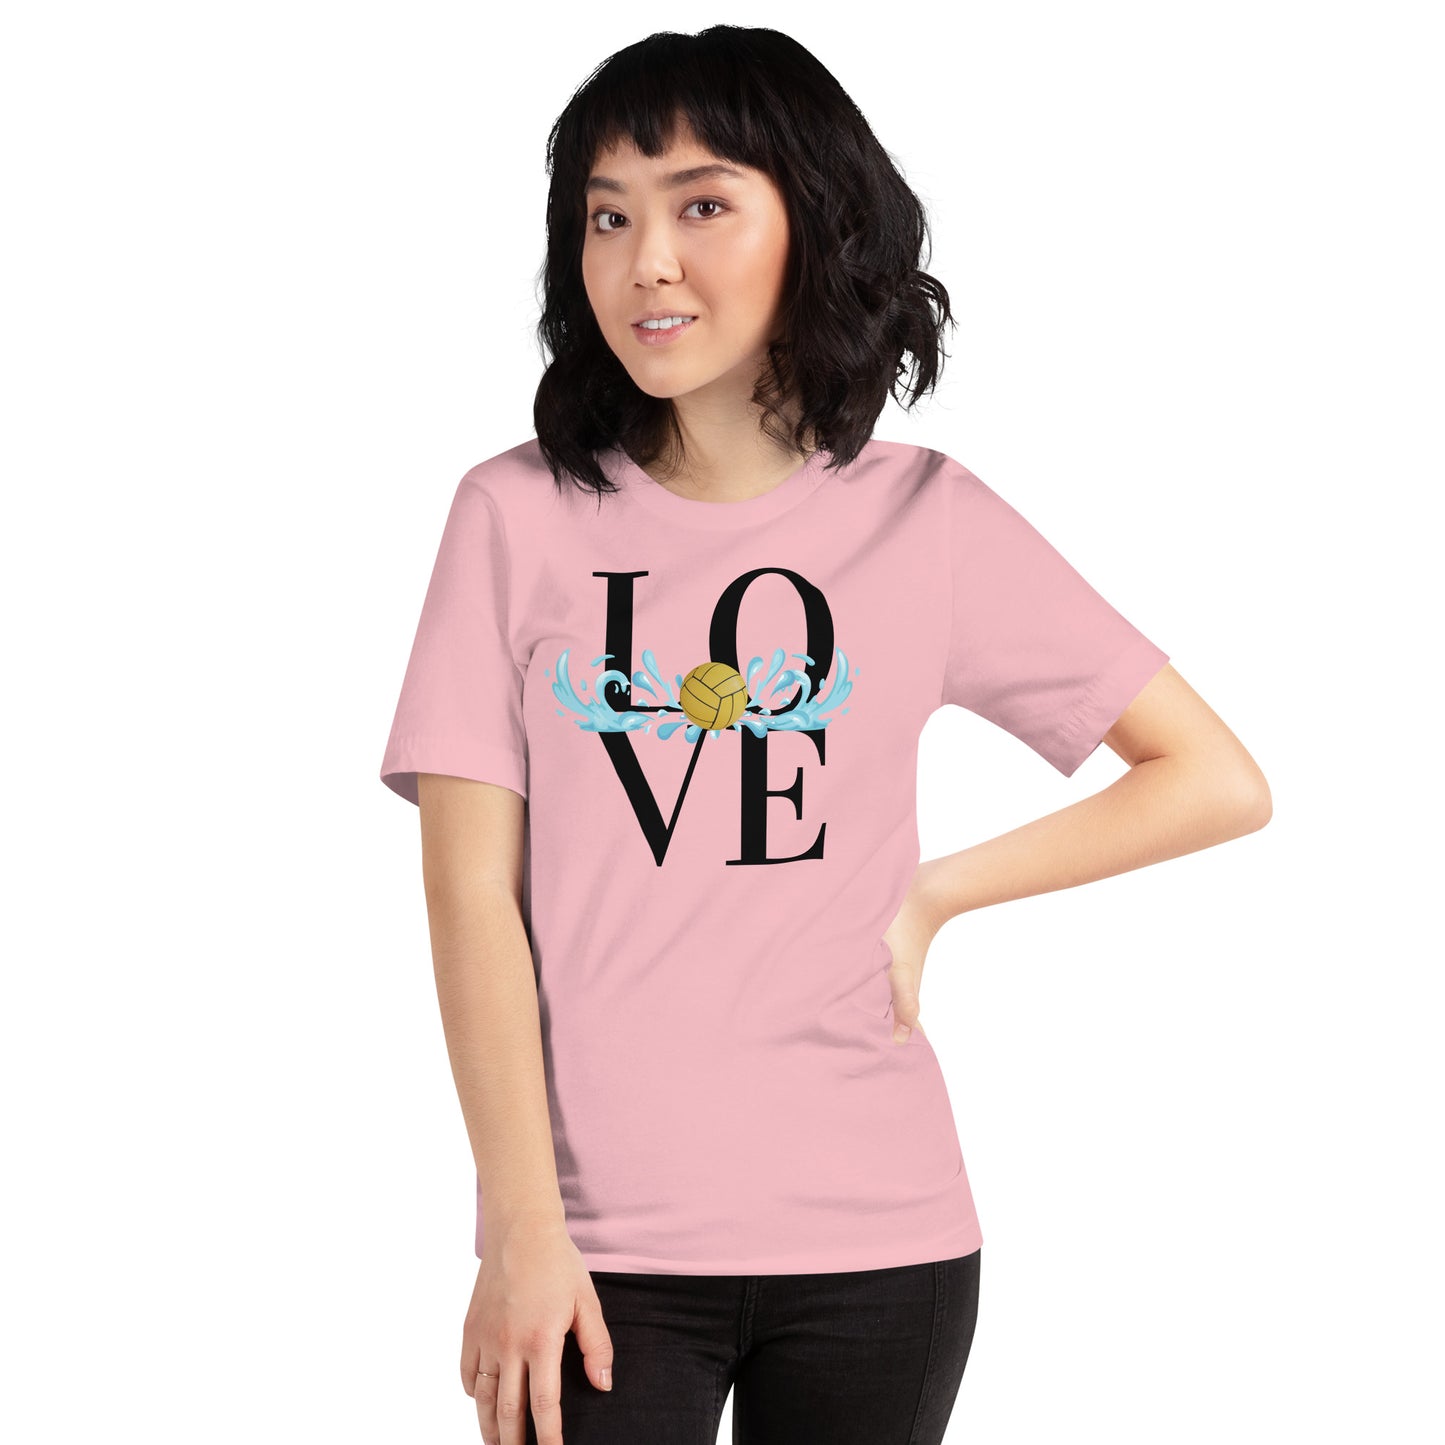 LOVE Waterpolo with a Big Splash - Unisex Soft T-shirt - Bella Canvas 3001